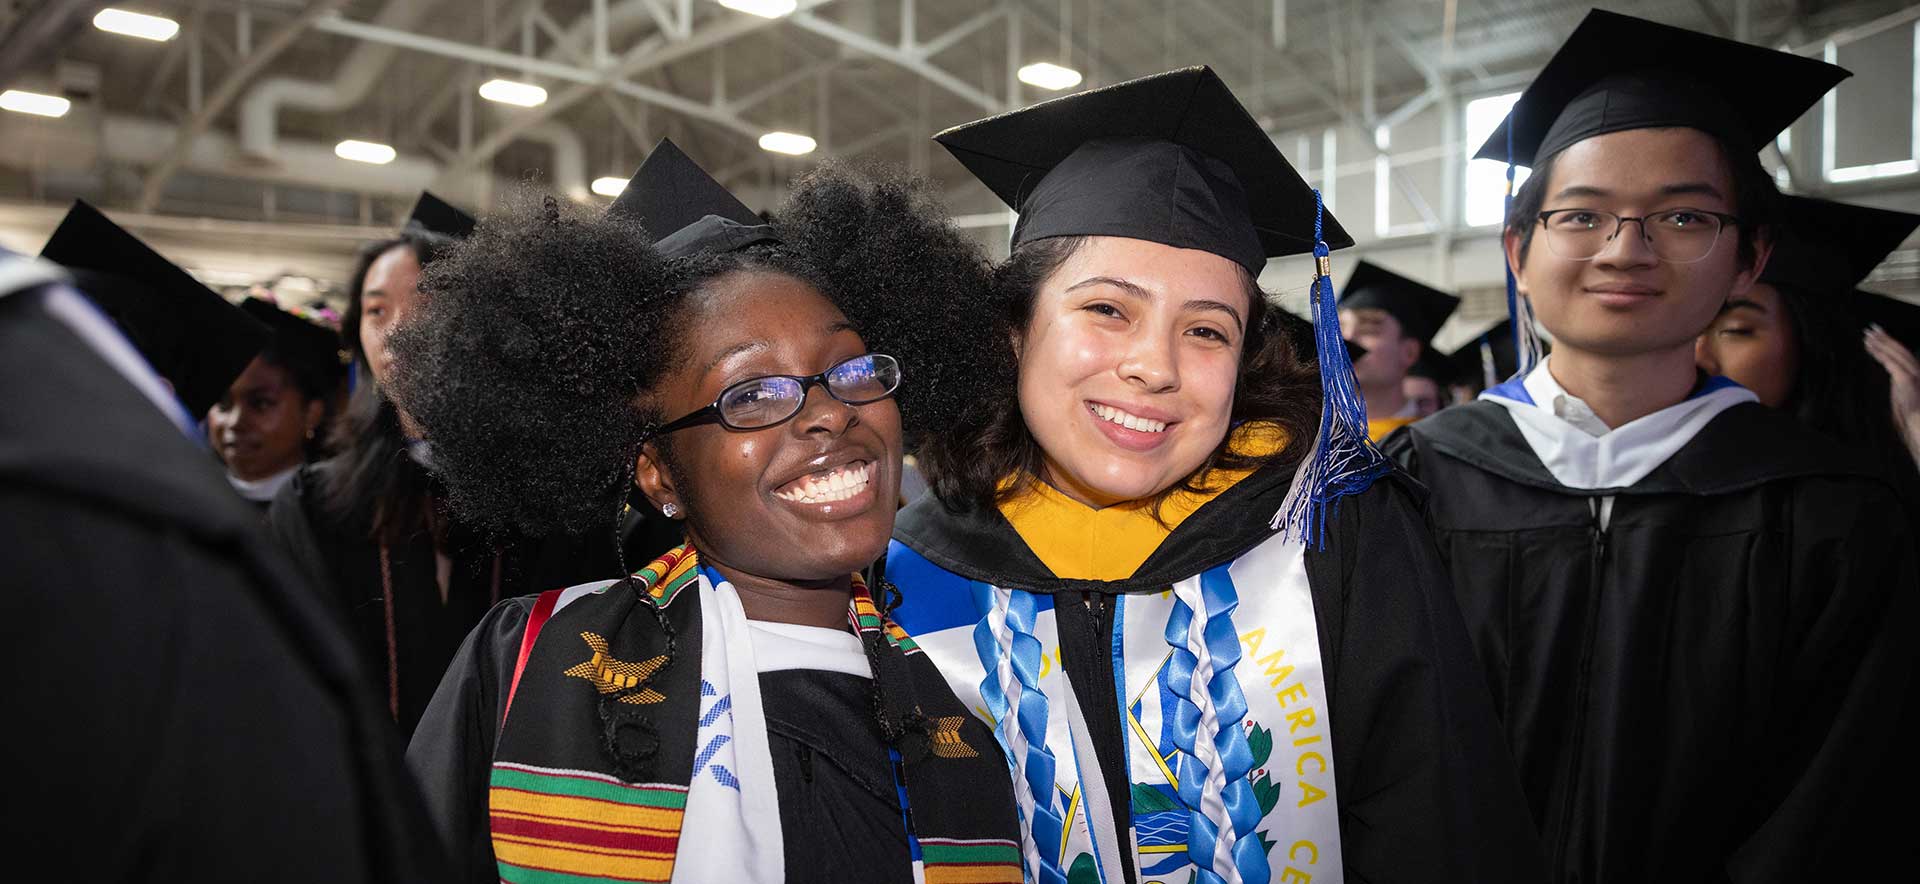 Graduates in caps and gowns smile during the Undergraduate Commencement ceremony